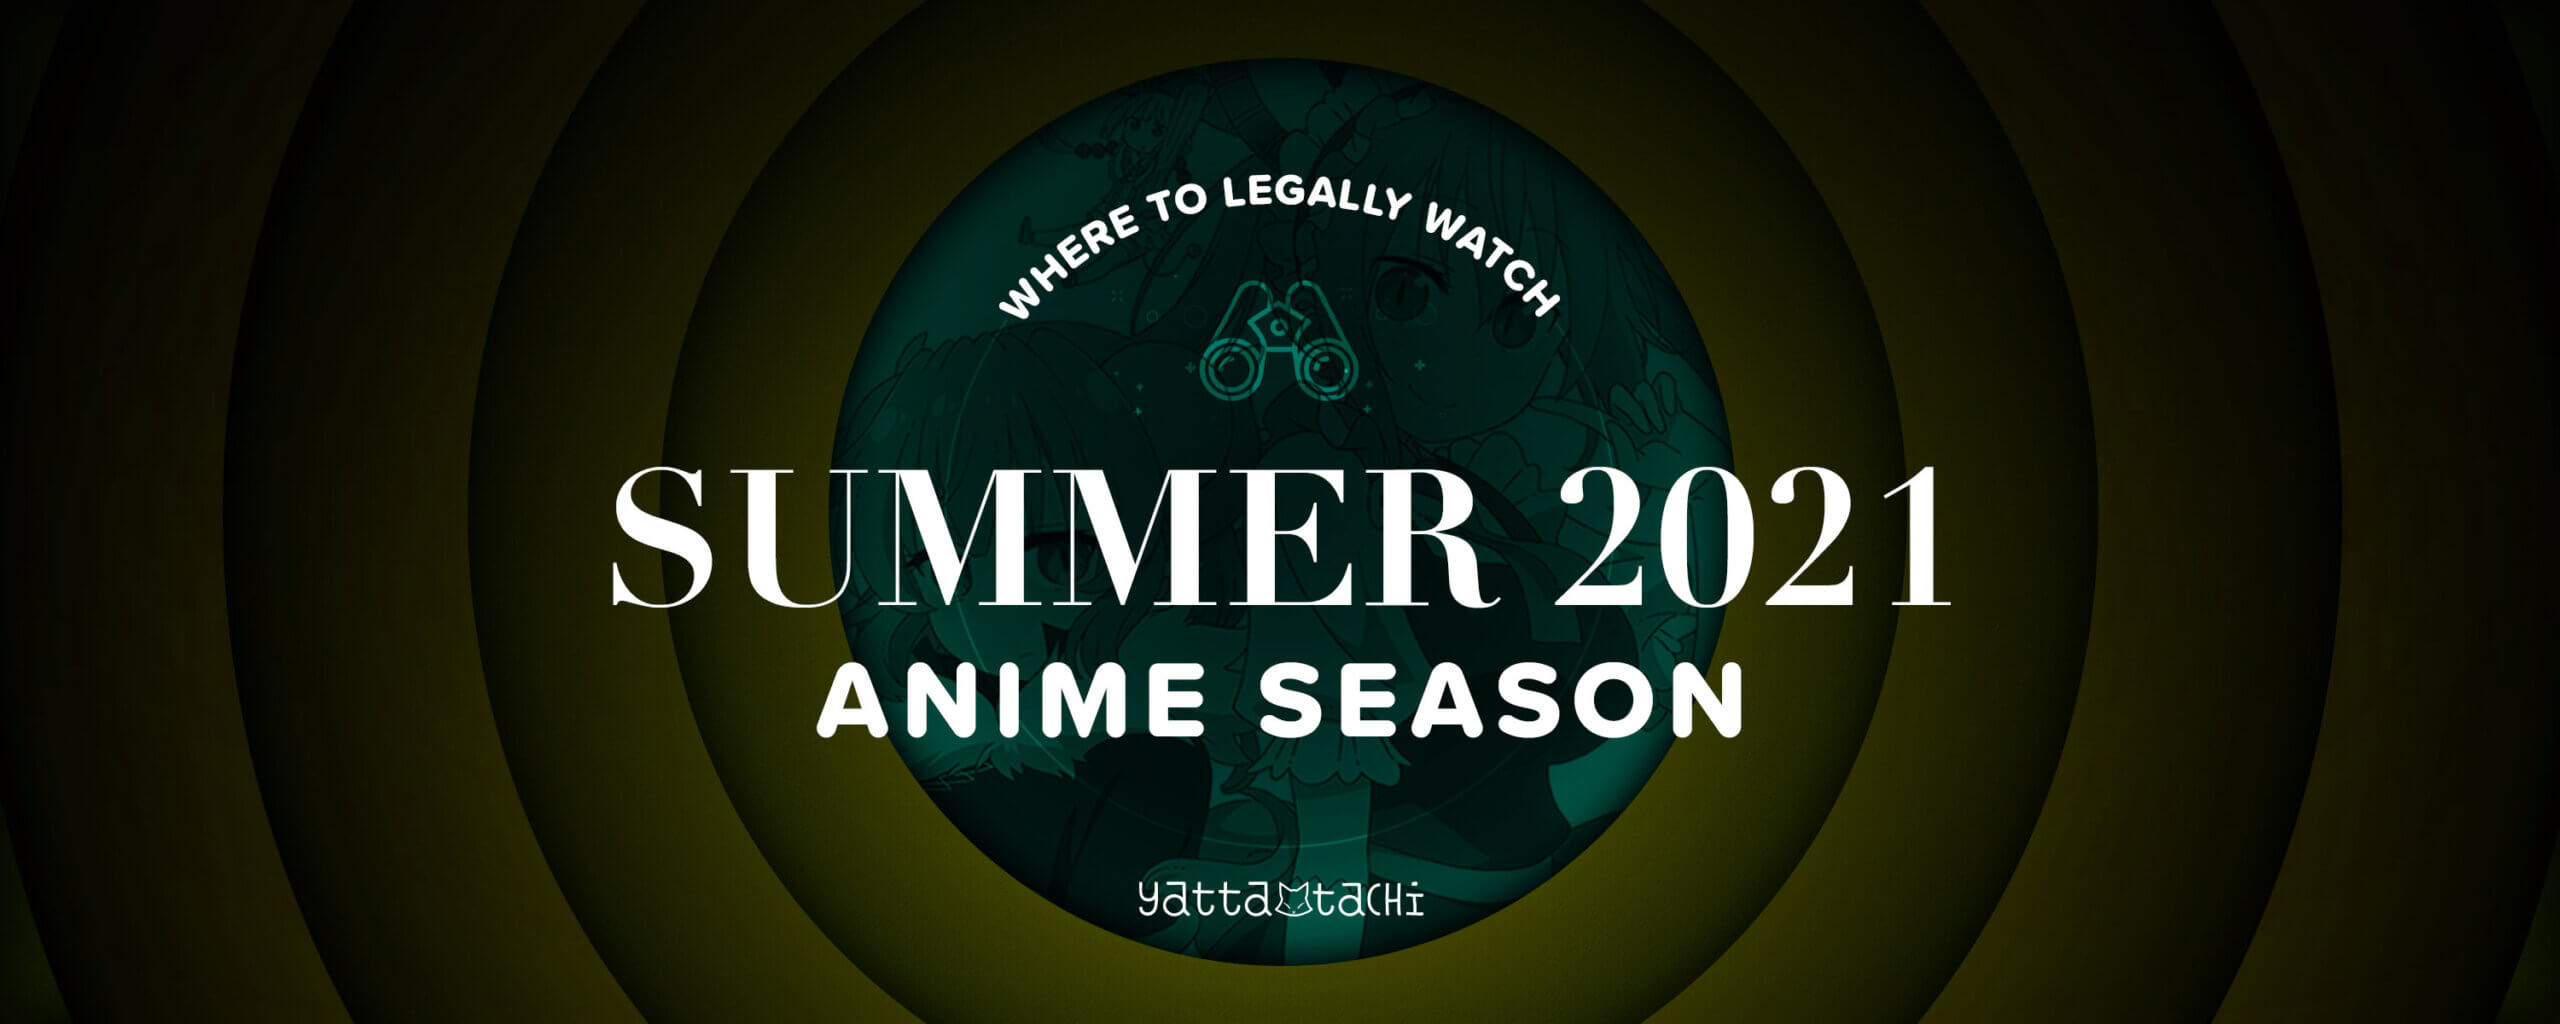 Top 10 Anime of the Week 5 for Spring 2021 Anime Season